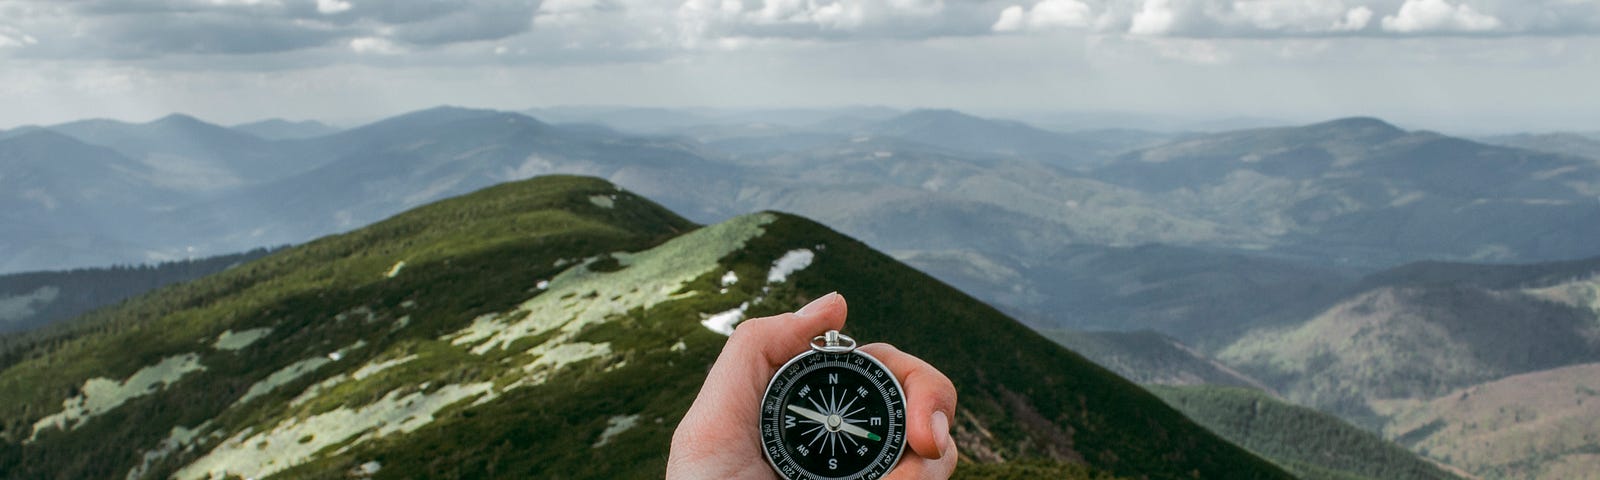 Man standing up in the mountains and holding a compass in his hands